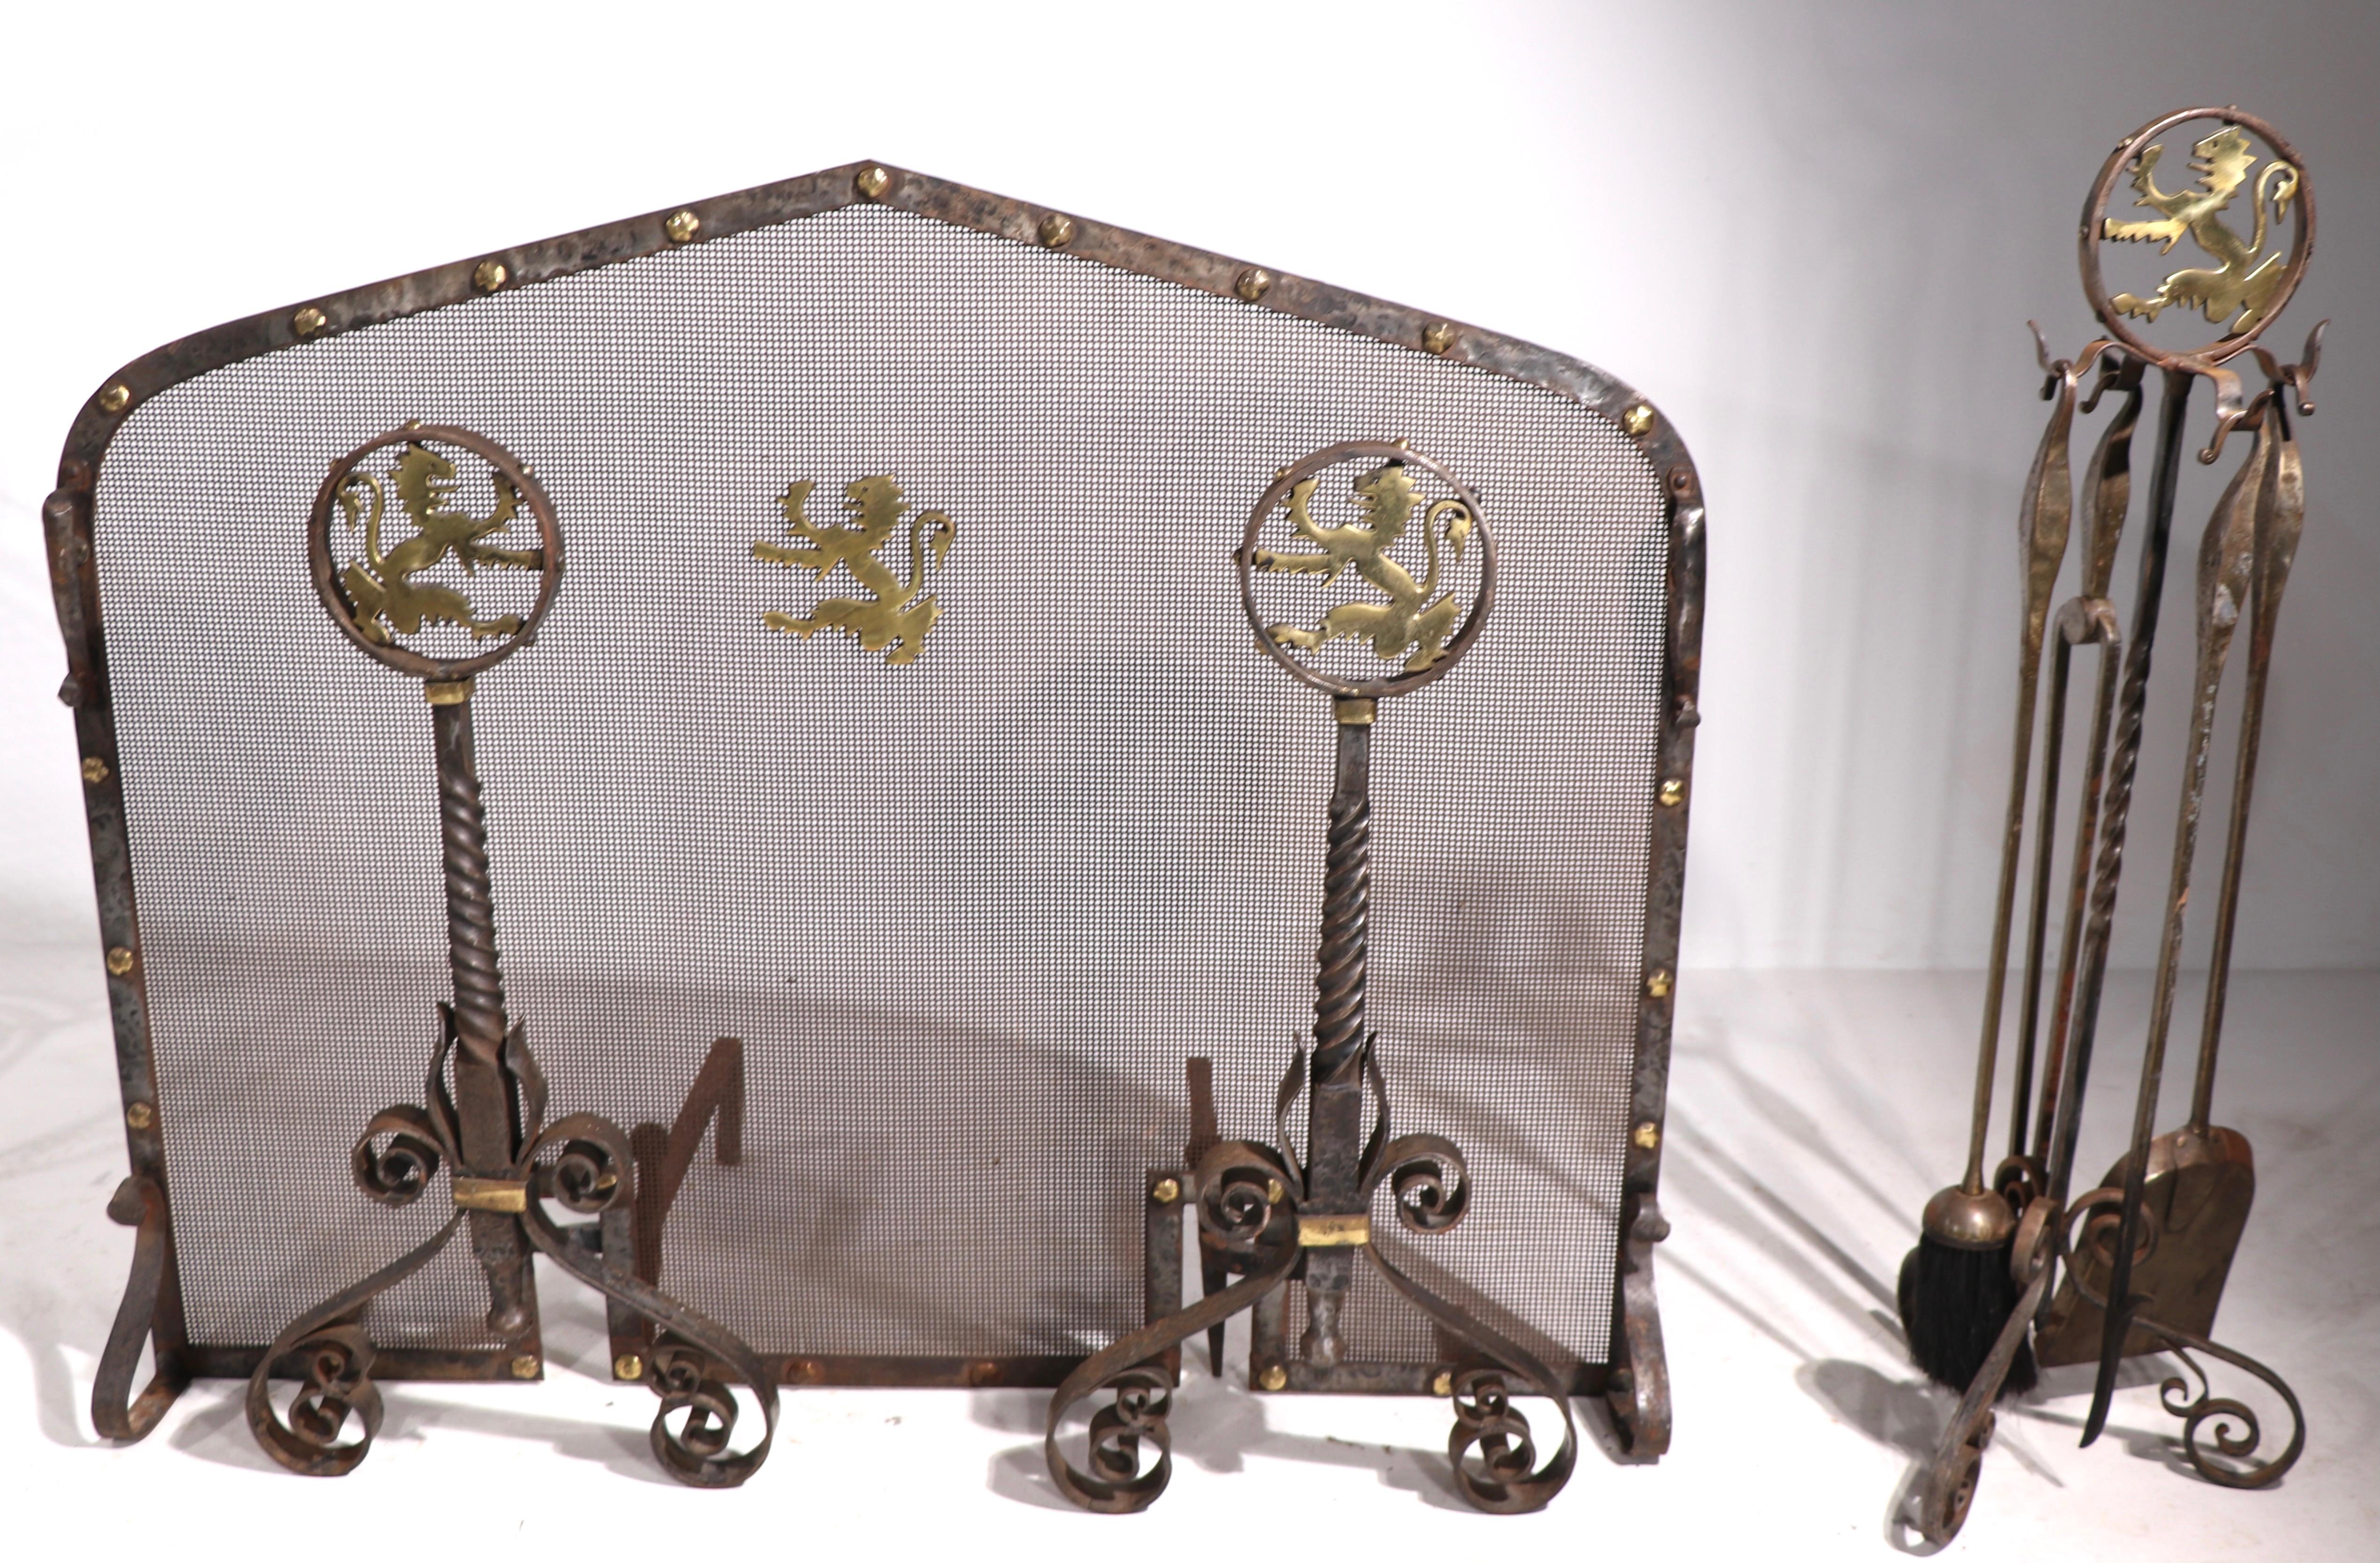 Wonderful Gothic style fireplace set to included andirons, tools, and screen.The metalwork is of hand wrought iron with brass stud decorative trim, and a rampant lion also in brass. High quality craftsmanship, reminiscent of Brant or Bach, unsigned.